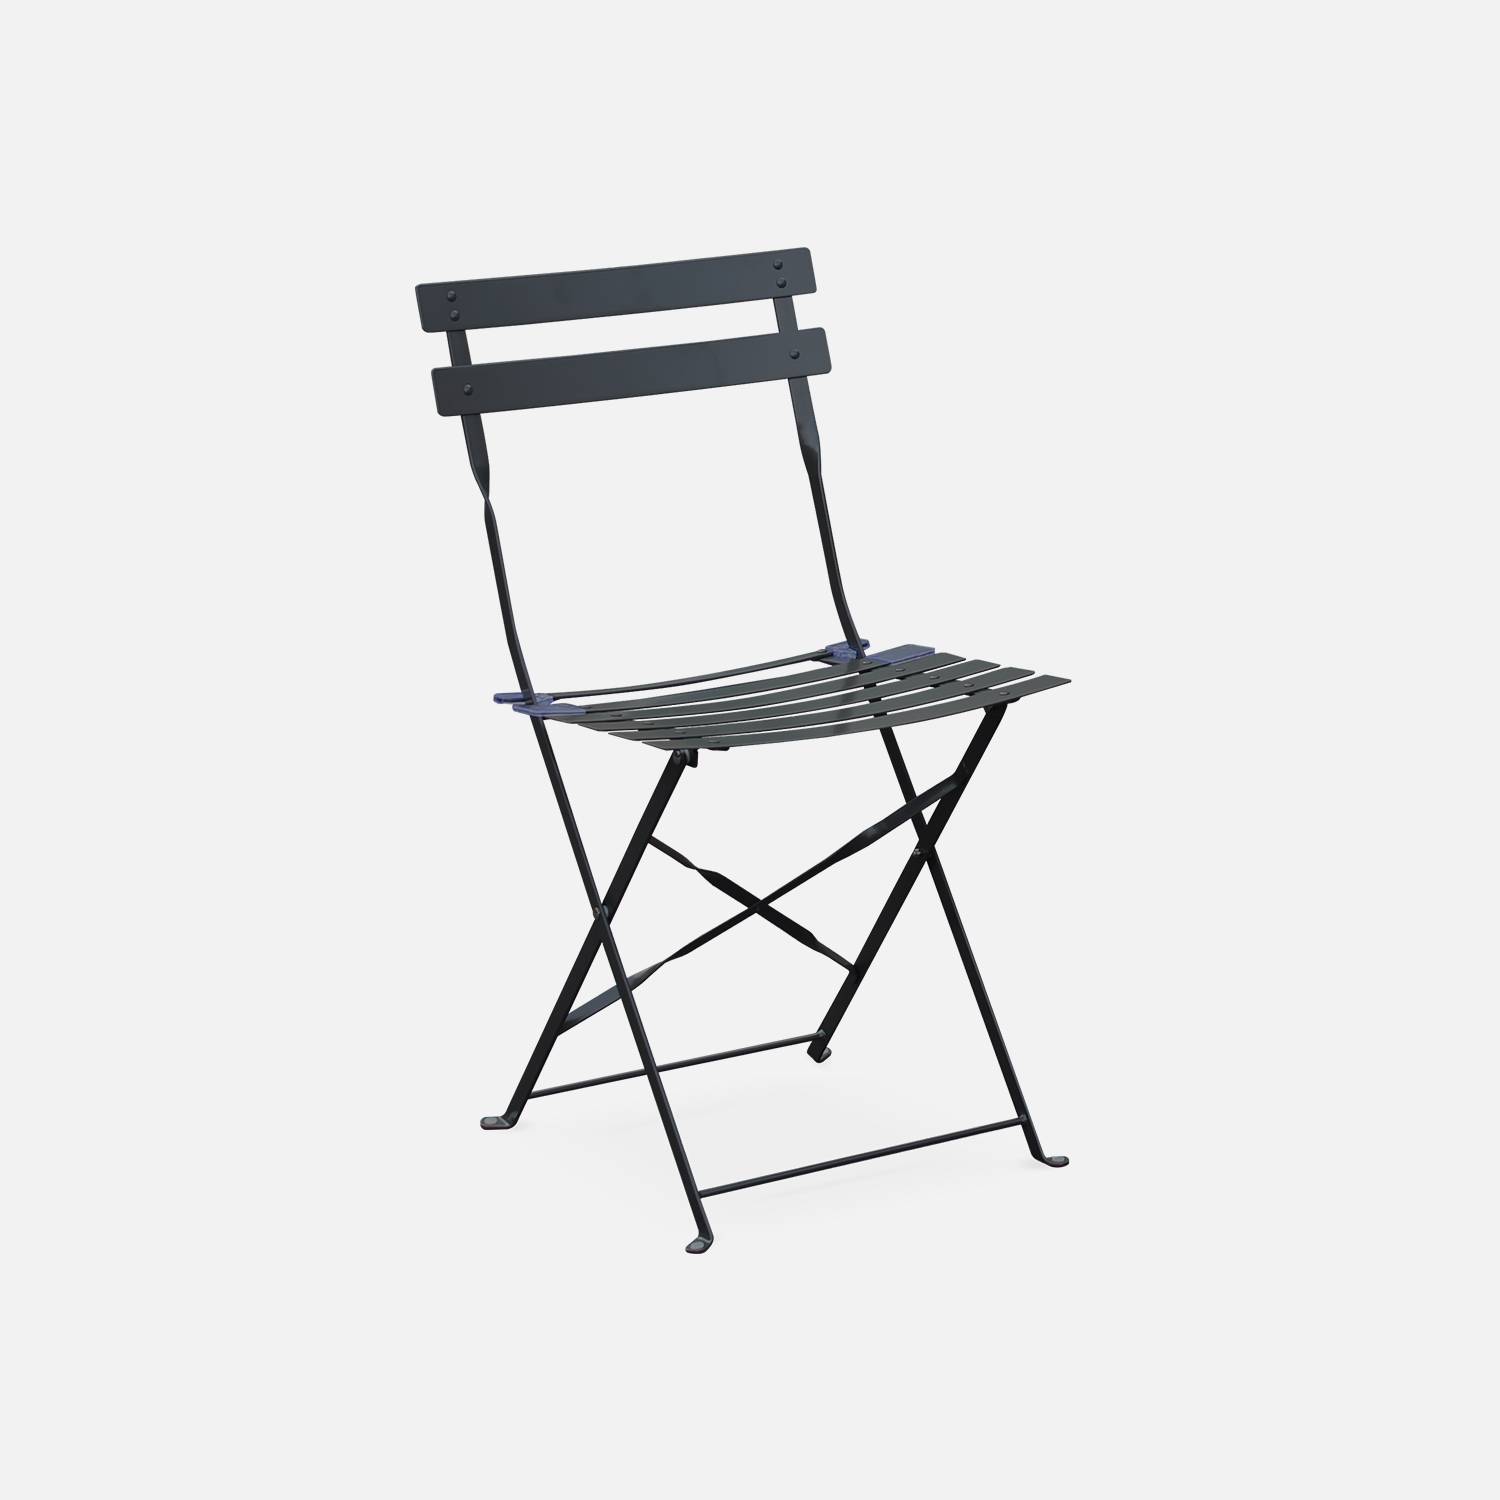 2-seater foldable thermo-lacquered steel bistro garden table with chairs, Ø60cm - Emilia - Anthracite Photo4